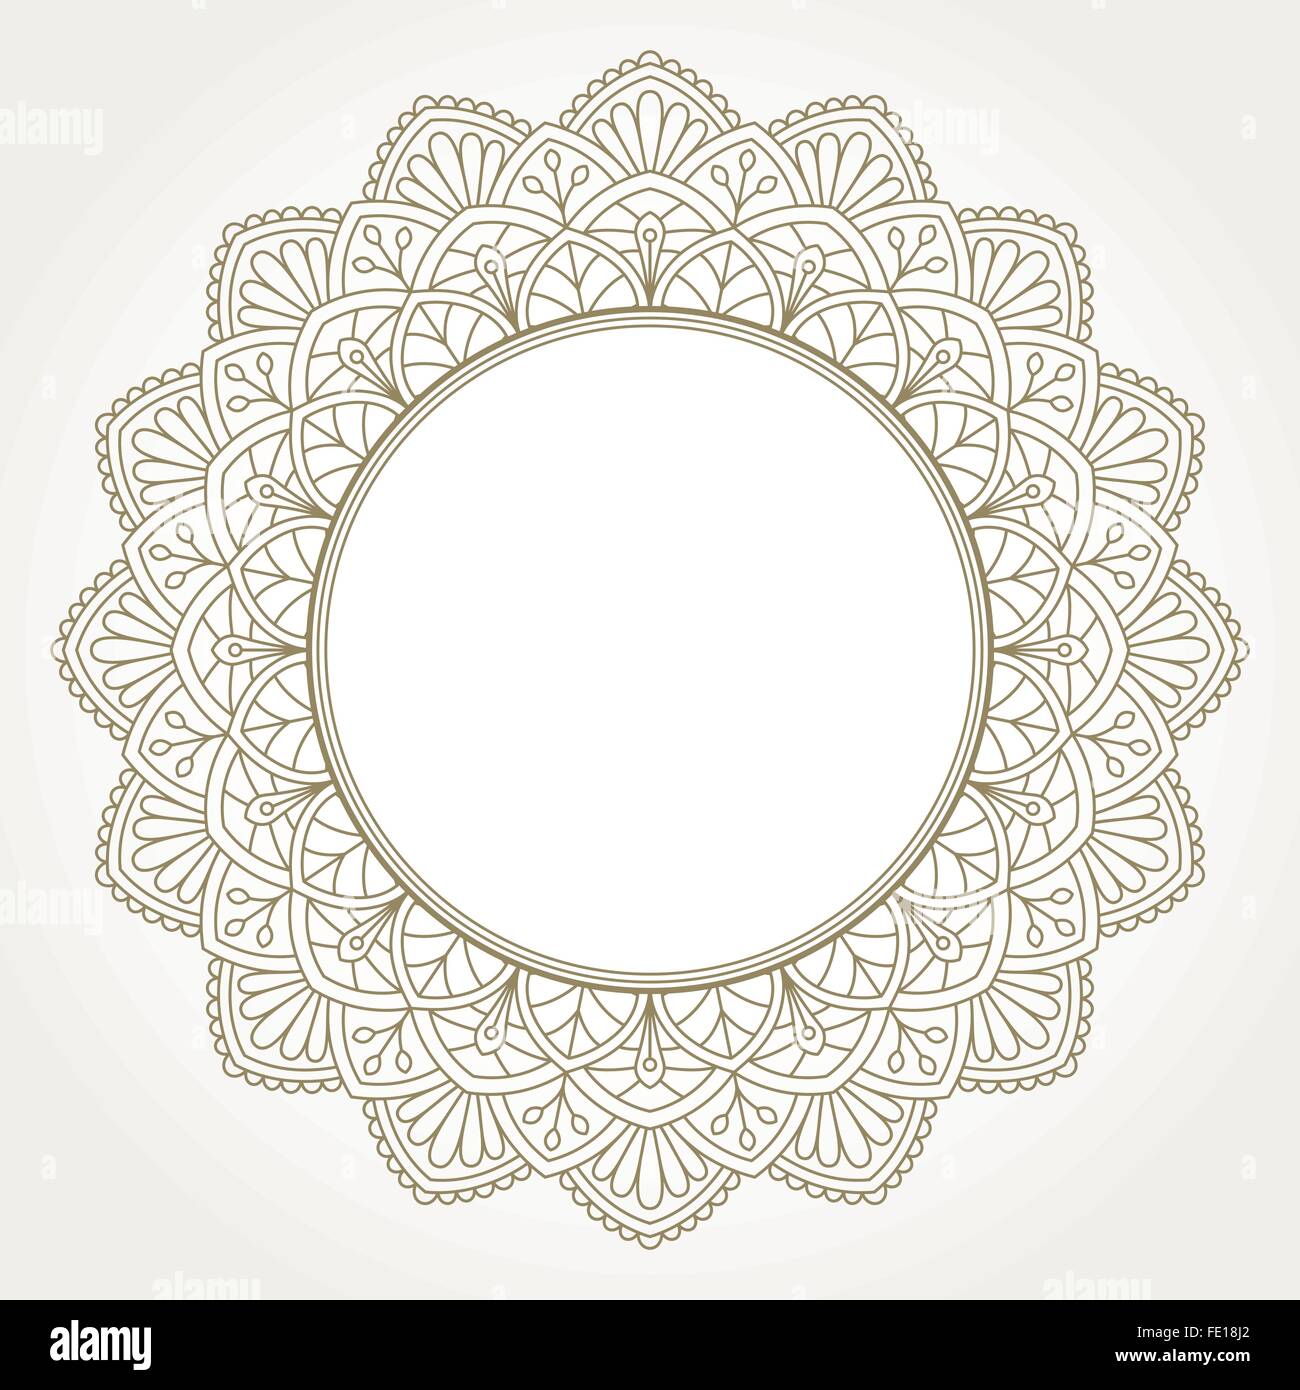 Ornamental round lace pattern. Stock Vector